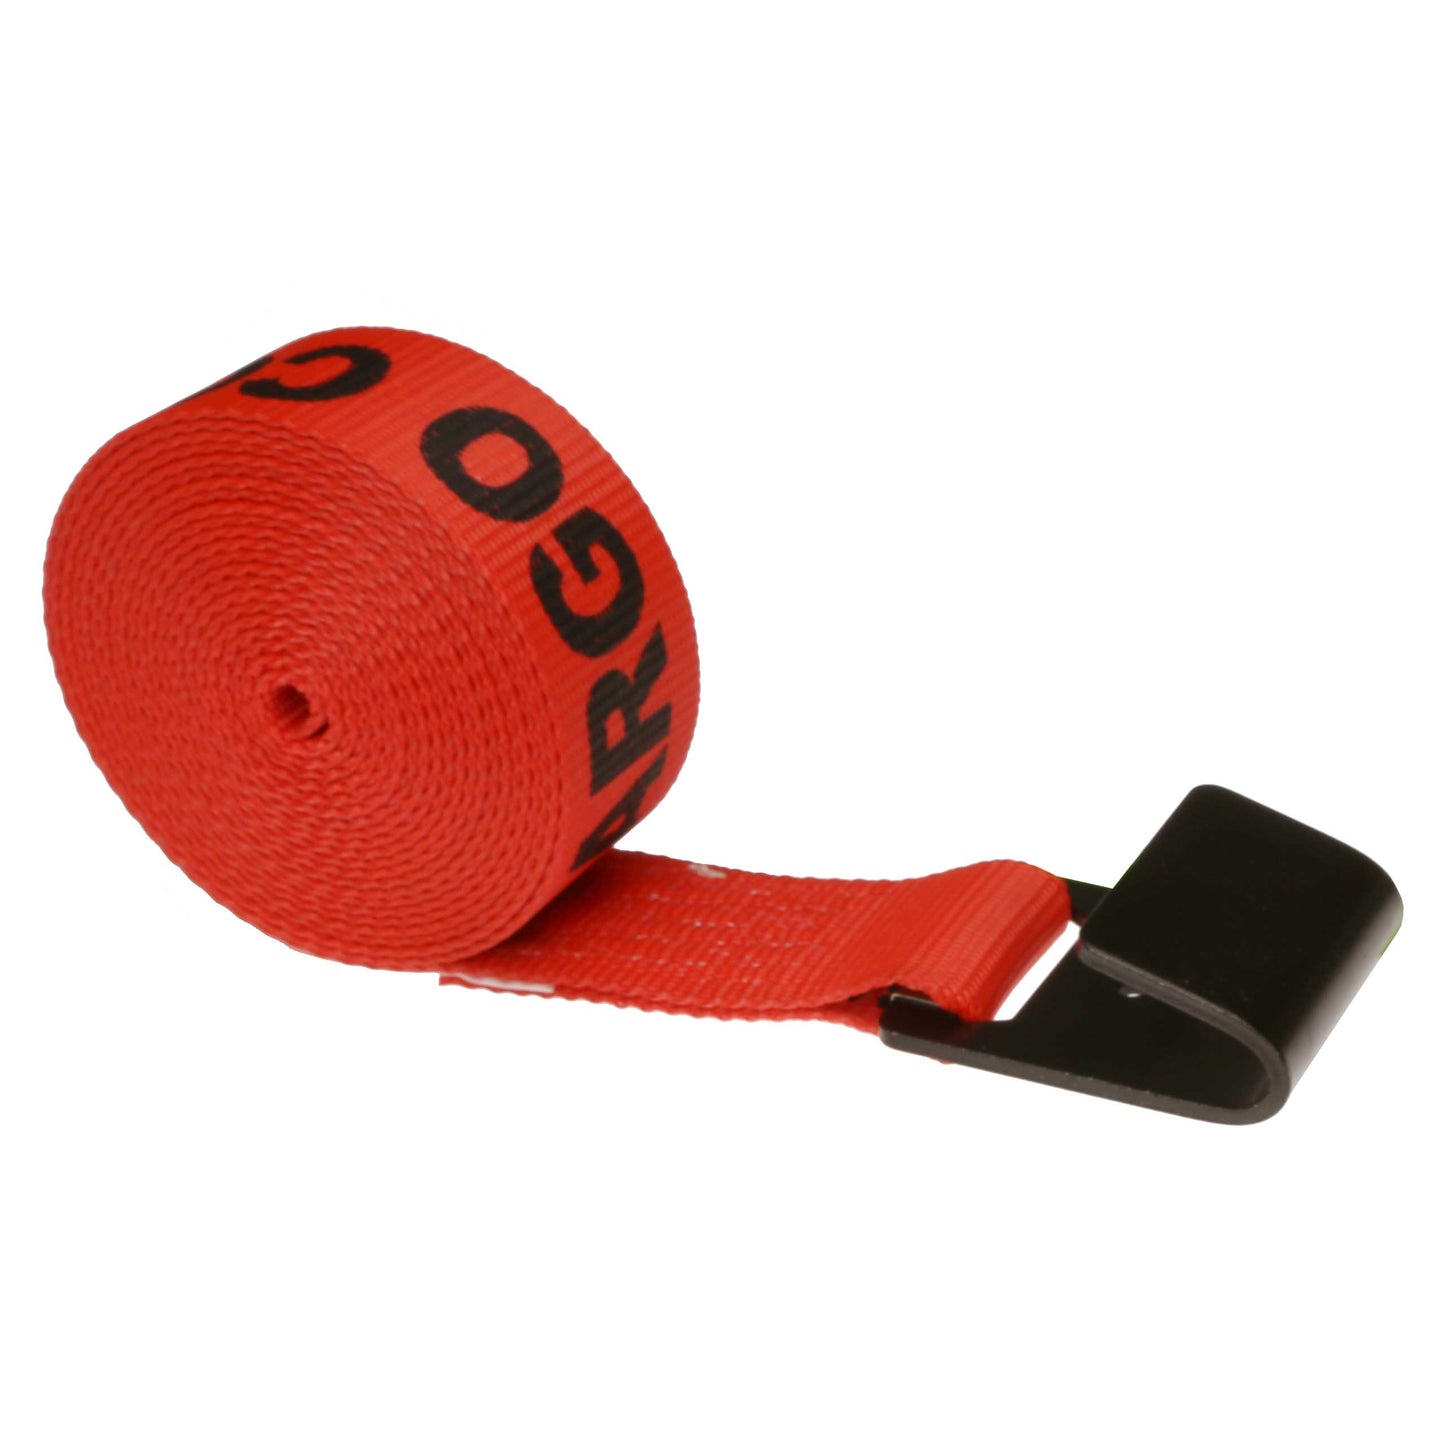 2 inch x 20 foot RED Winch Strap with Flat Hook